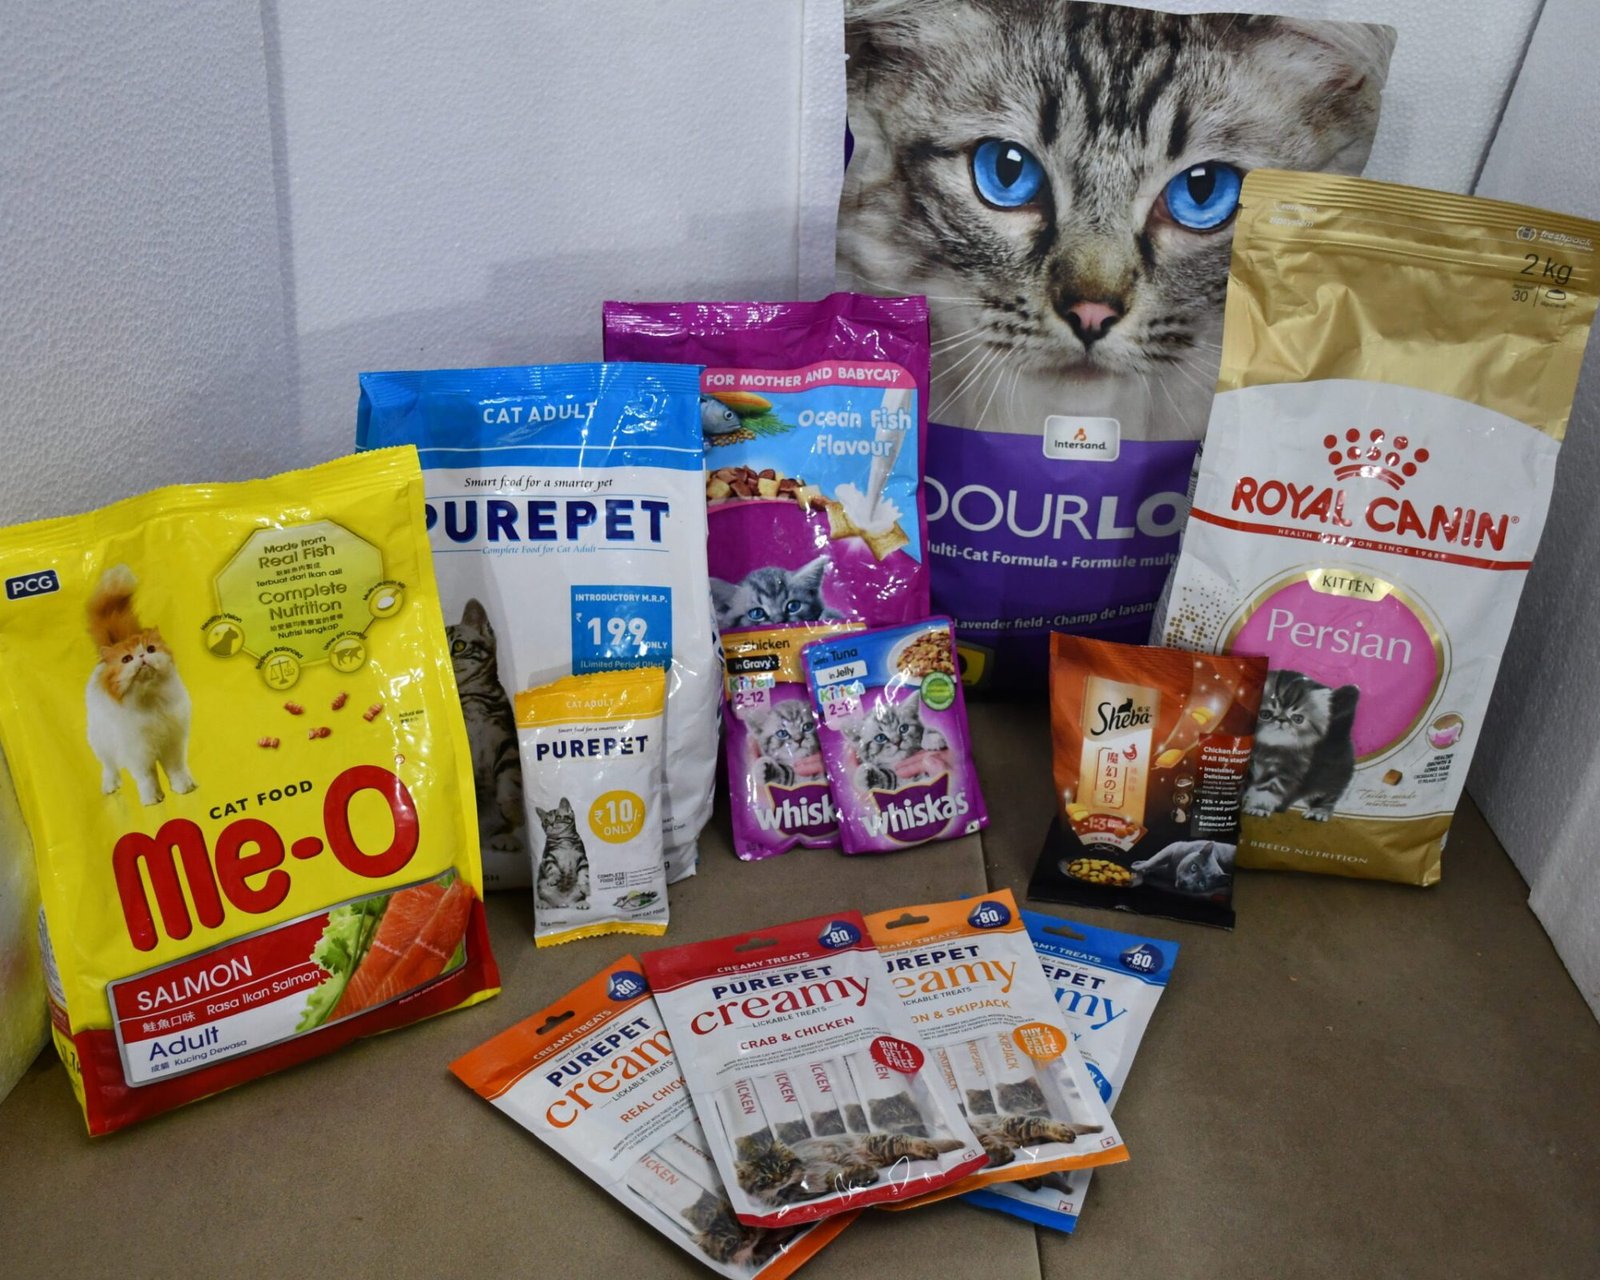 Cat Varity Food & Cat Litter Sand (Of Variety Brands; Purepet, Me-o, Drools, Royal Canin)